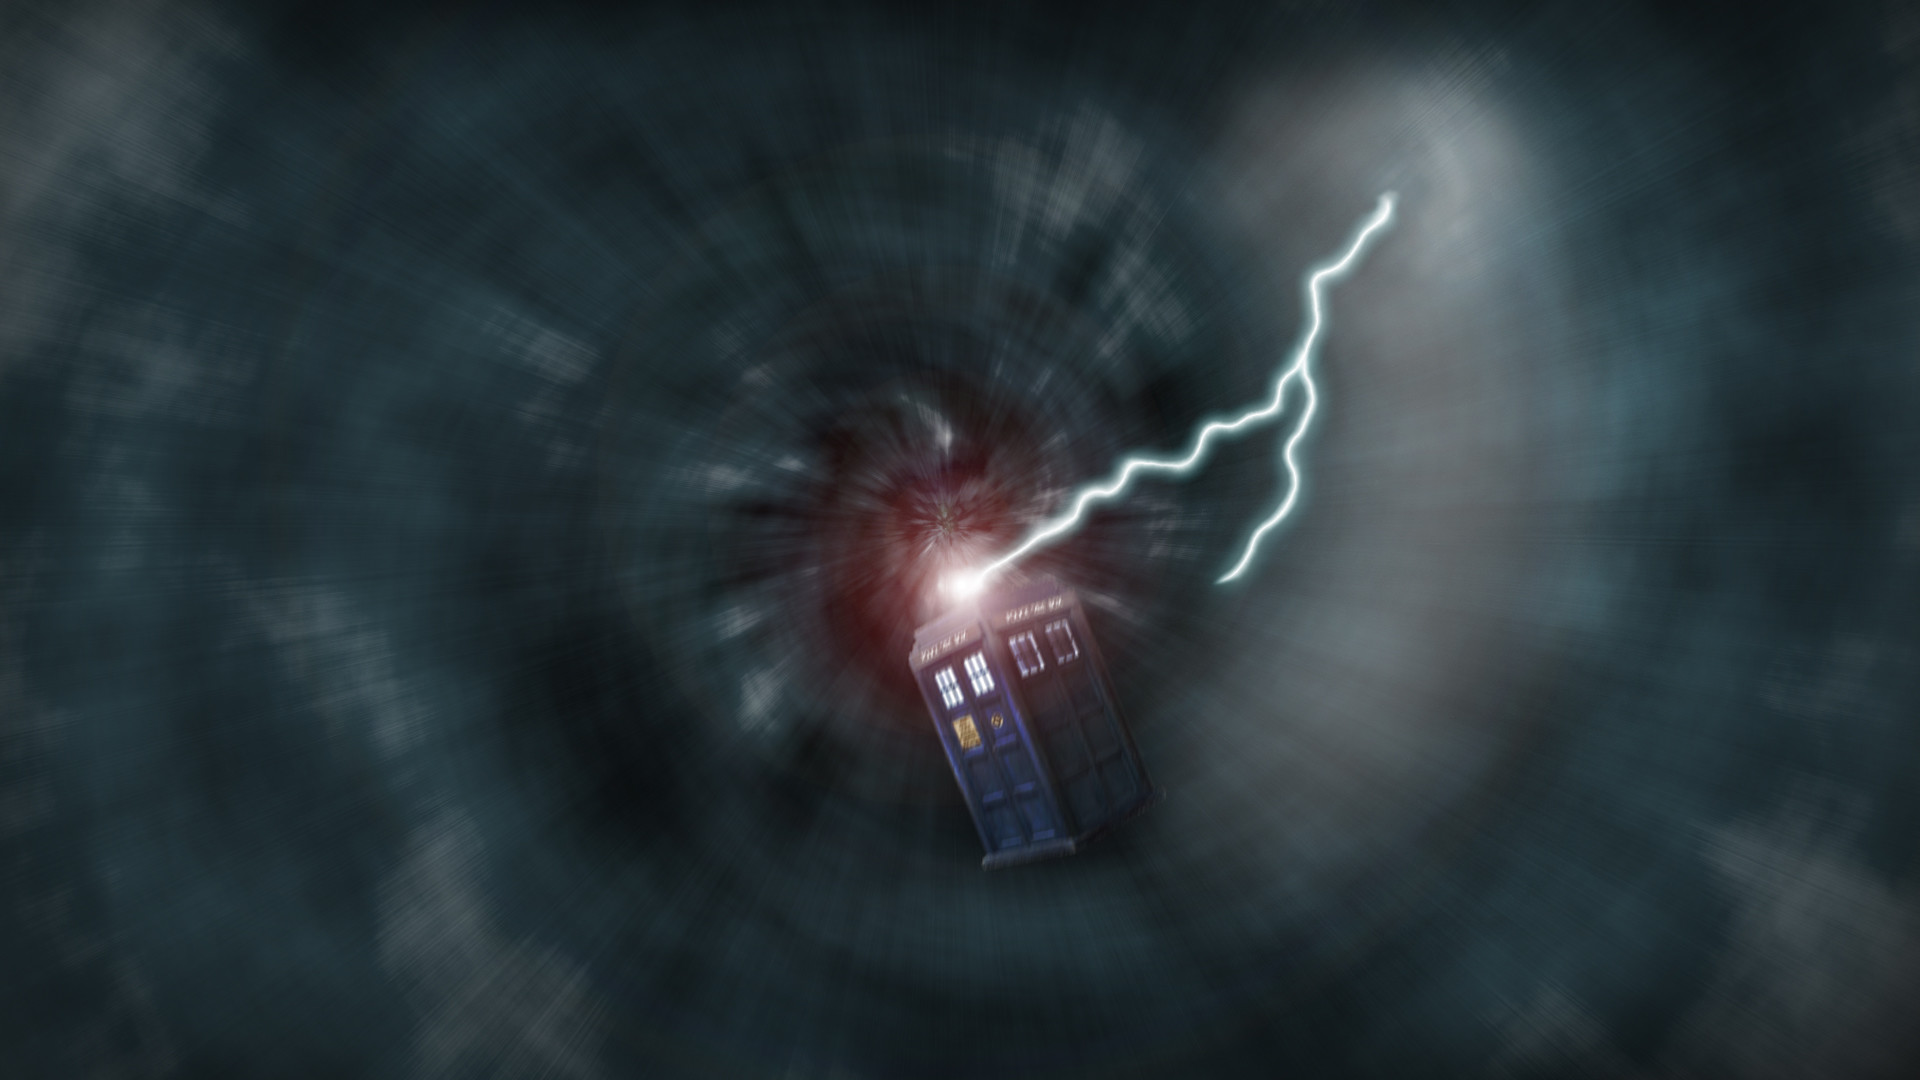 1920x1080 Doctor who wallpapers HD A12 - Dr Who Wallpapers | Doctor who backgrounds |  doctor who